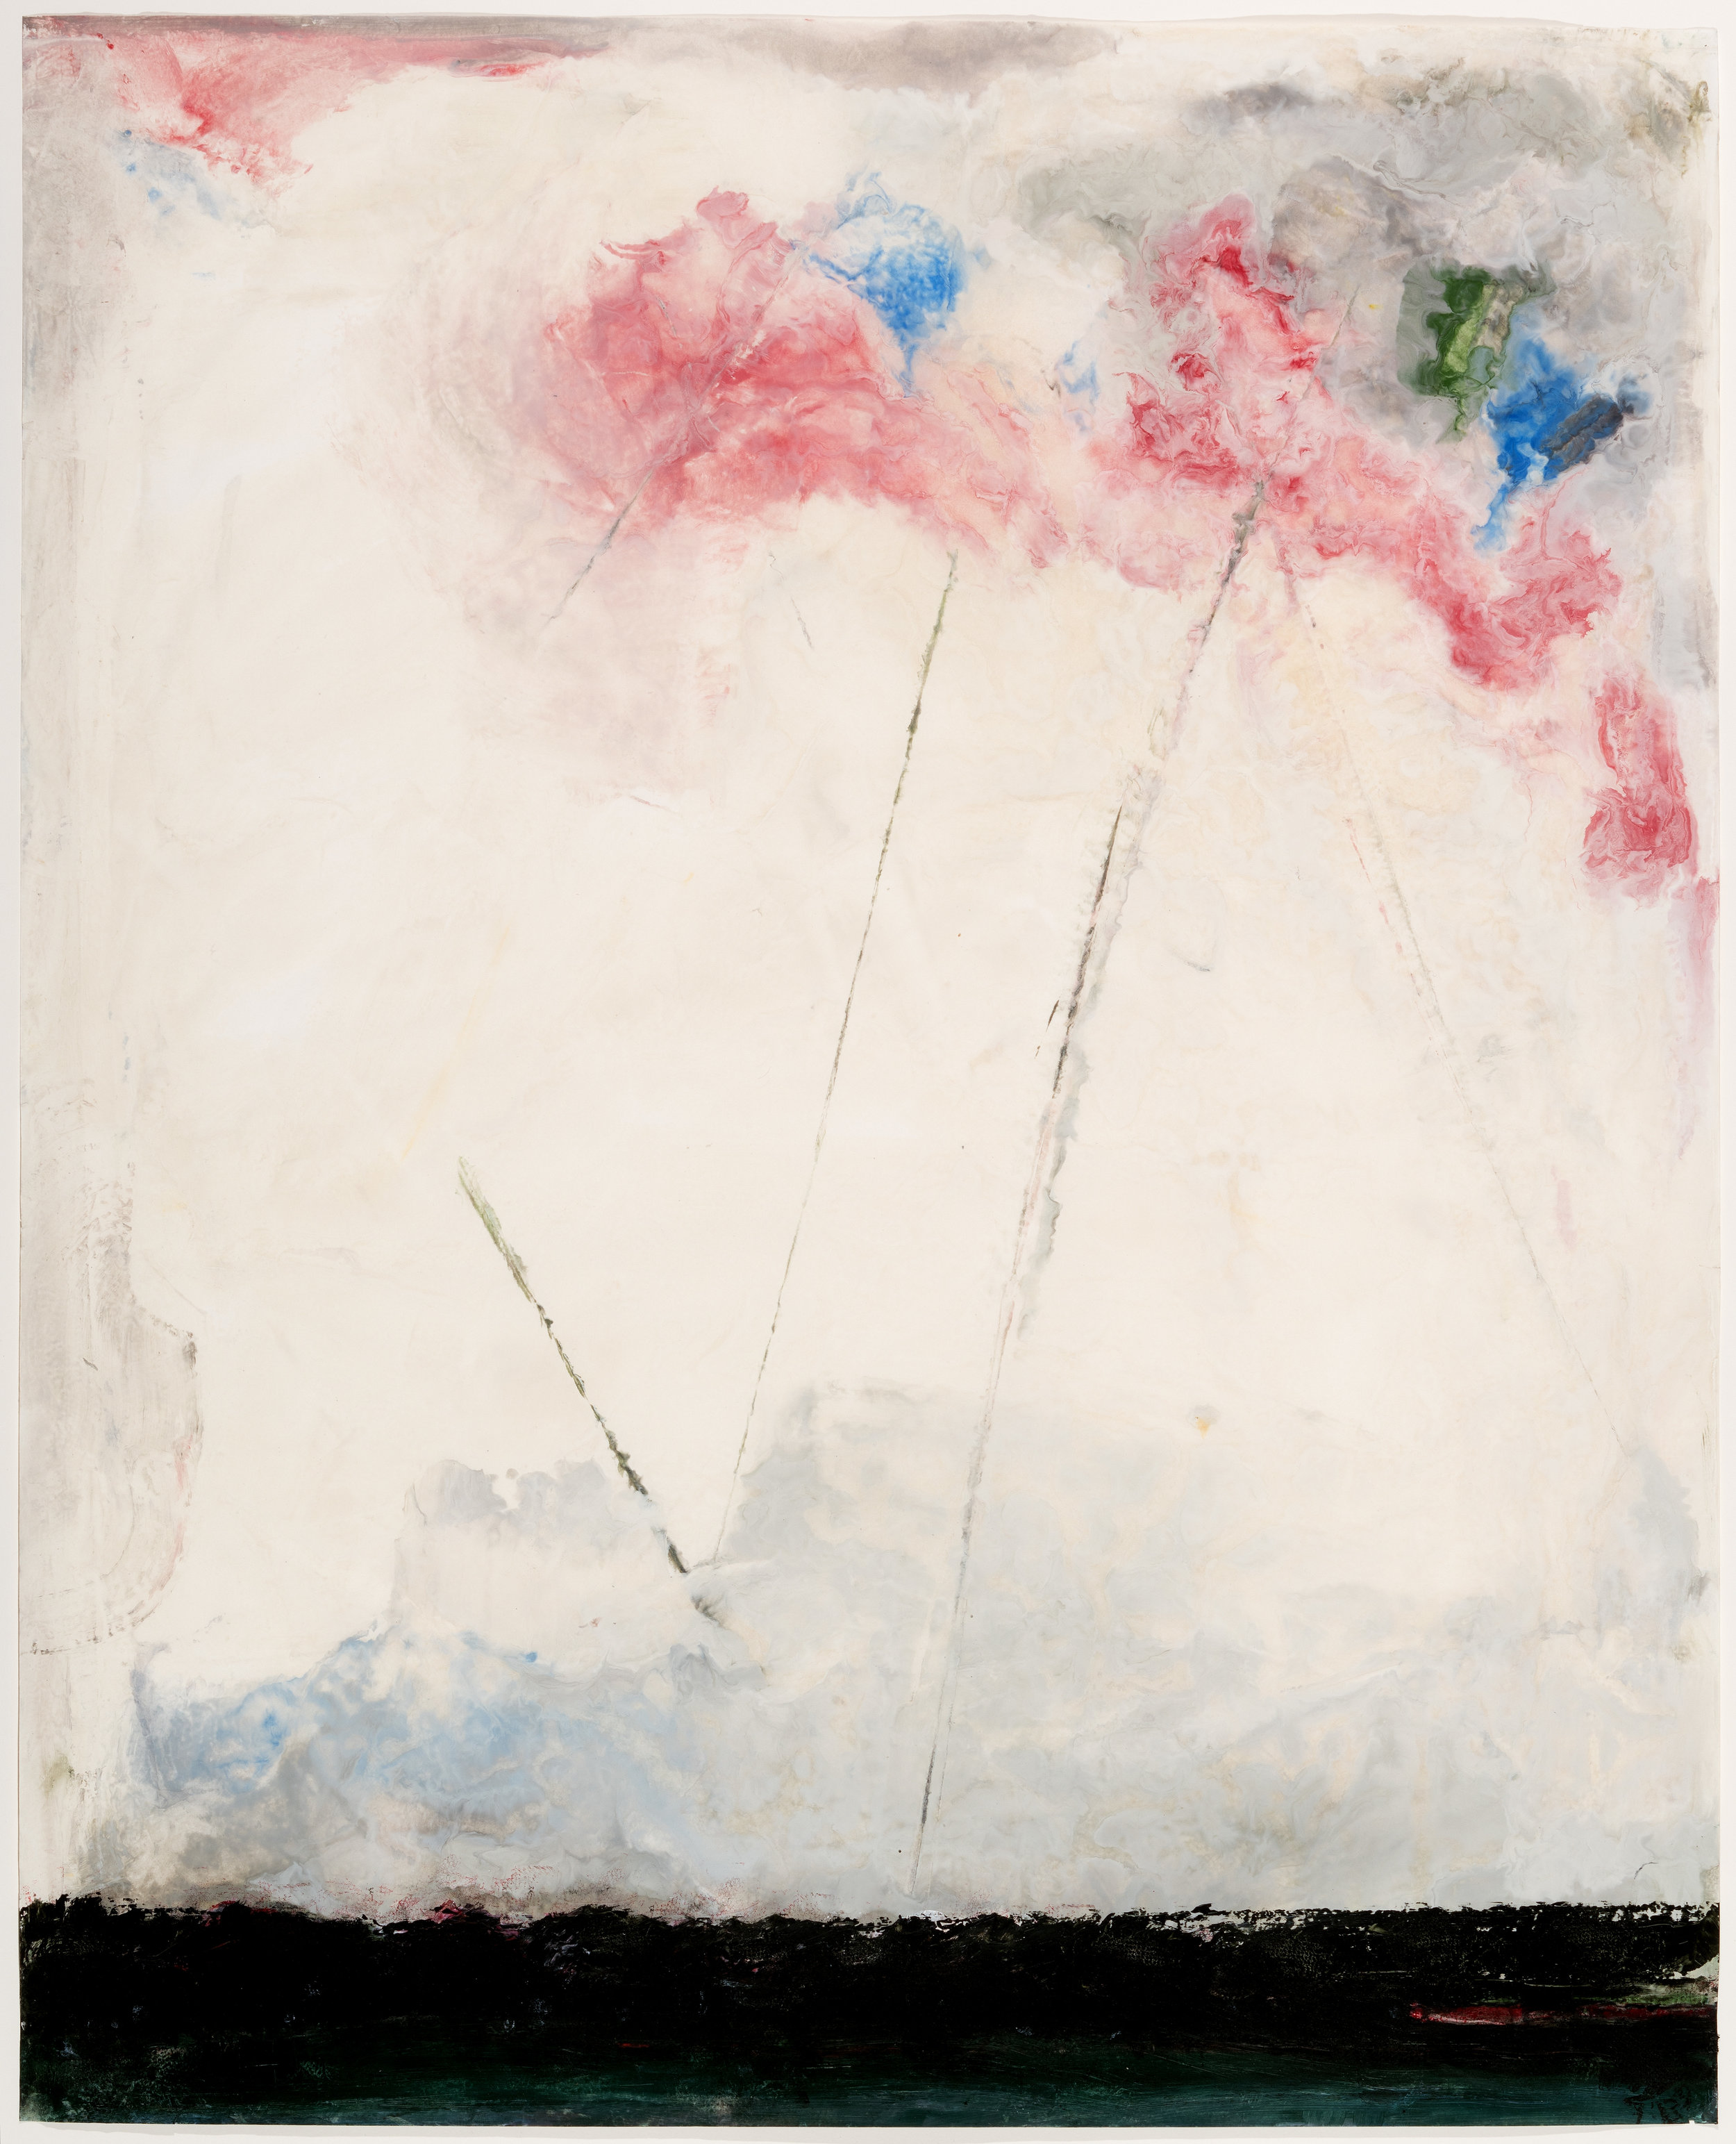 Lolli Pop Flowers, 2018, encaustic on rice paper, 47 x 39 in, SOLD